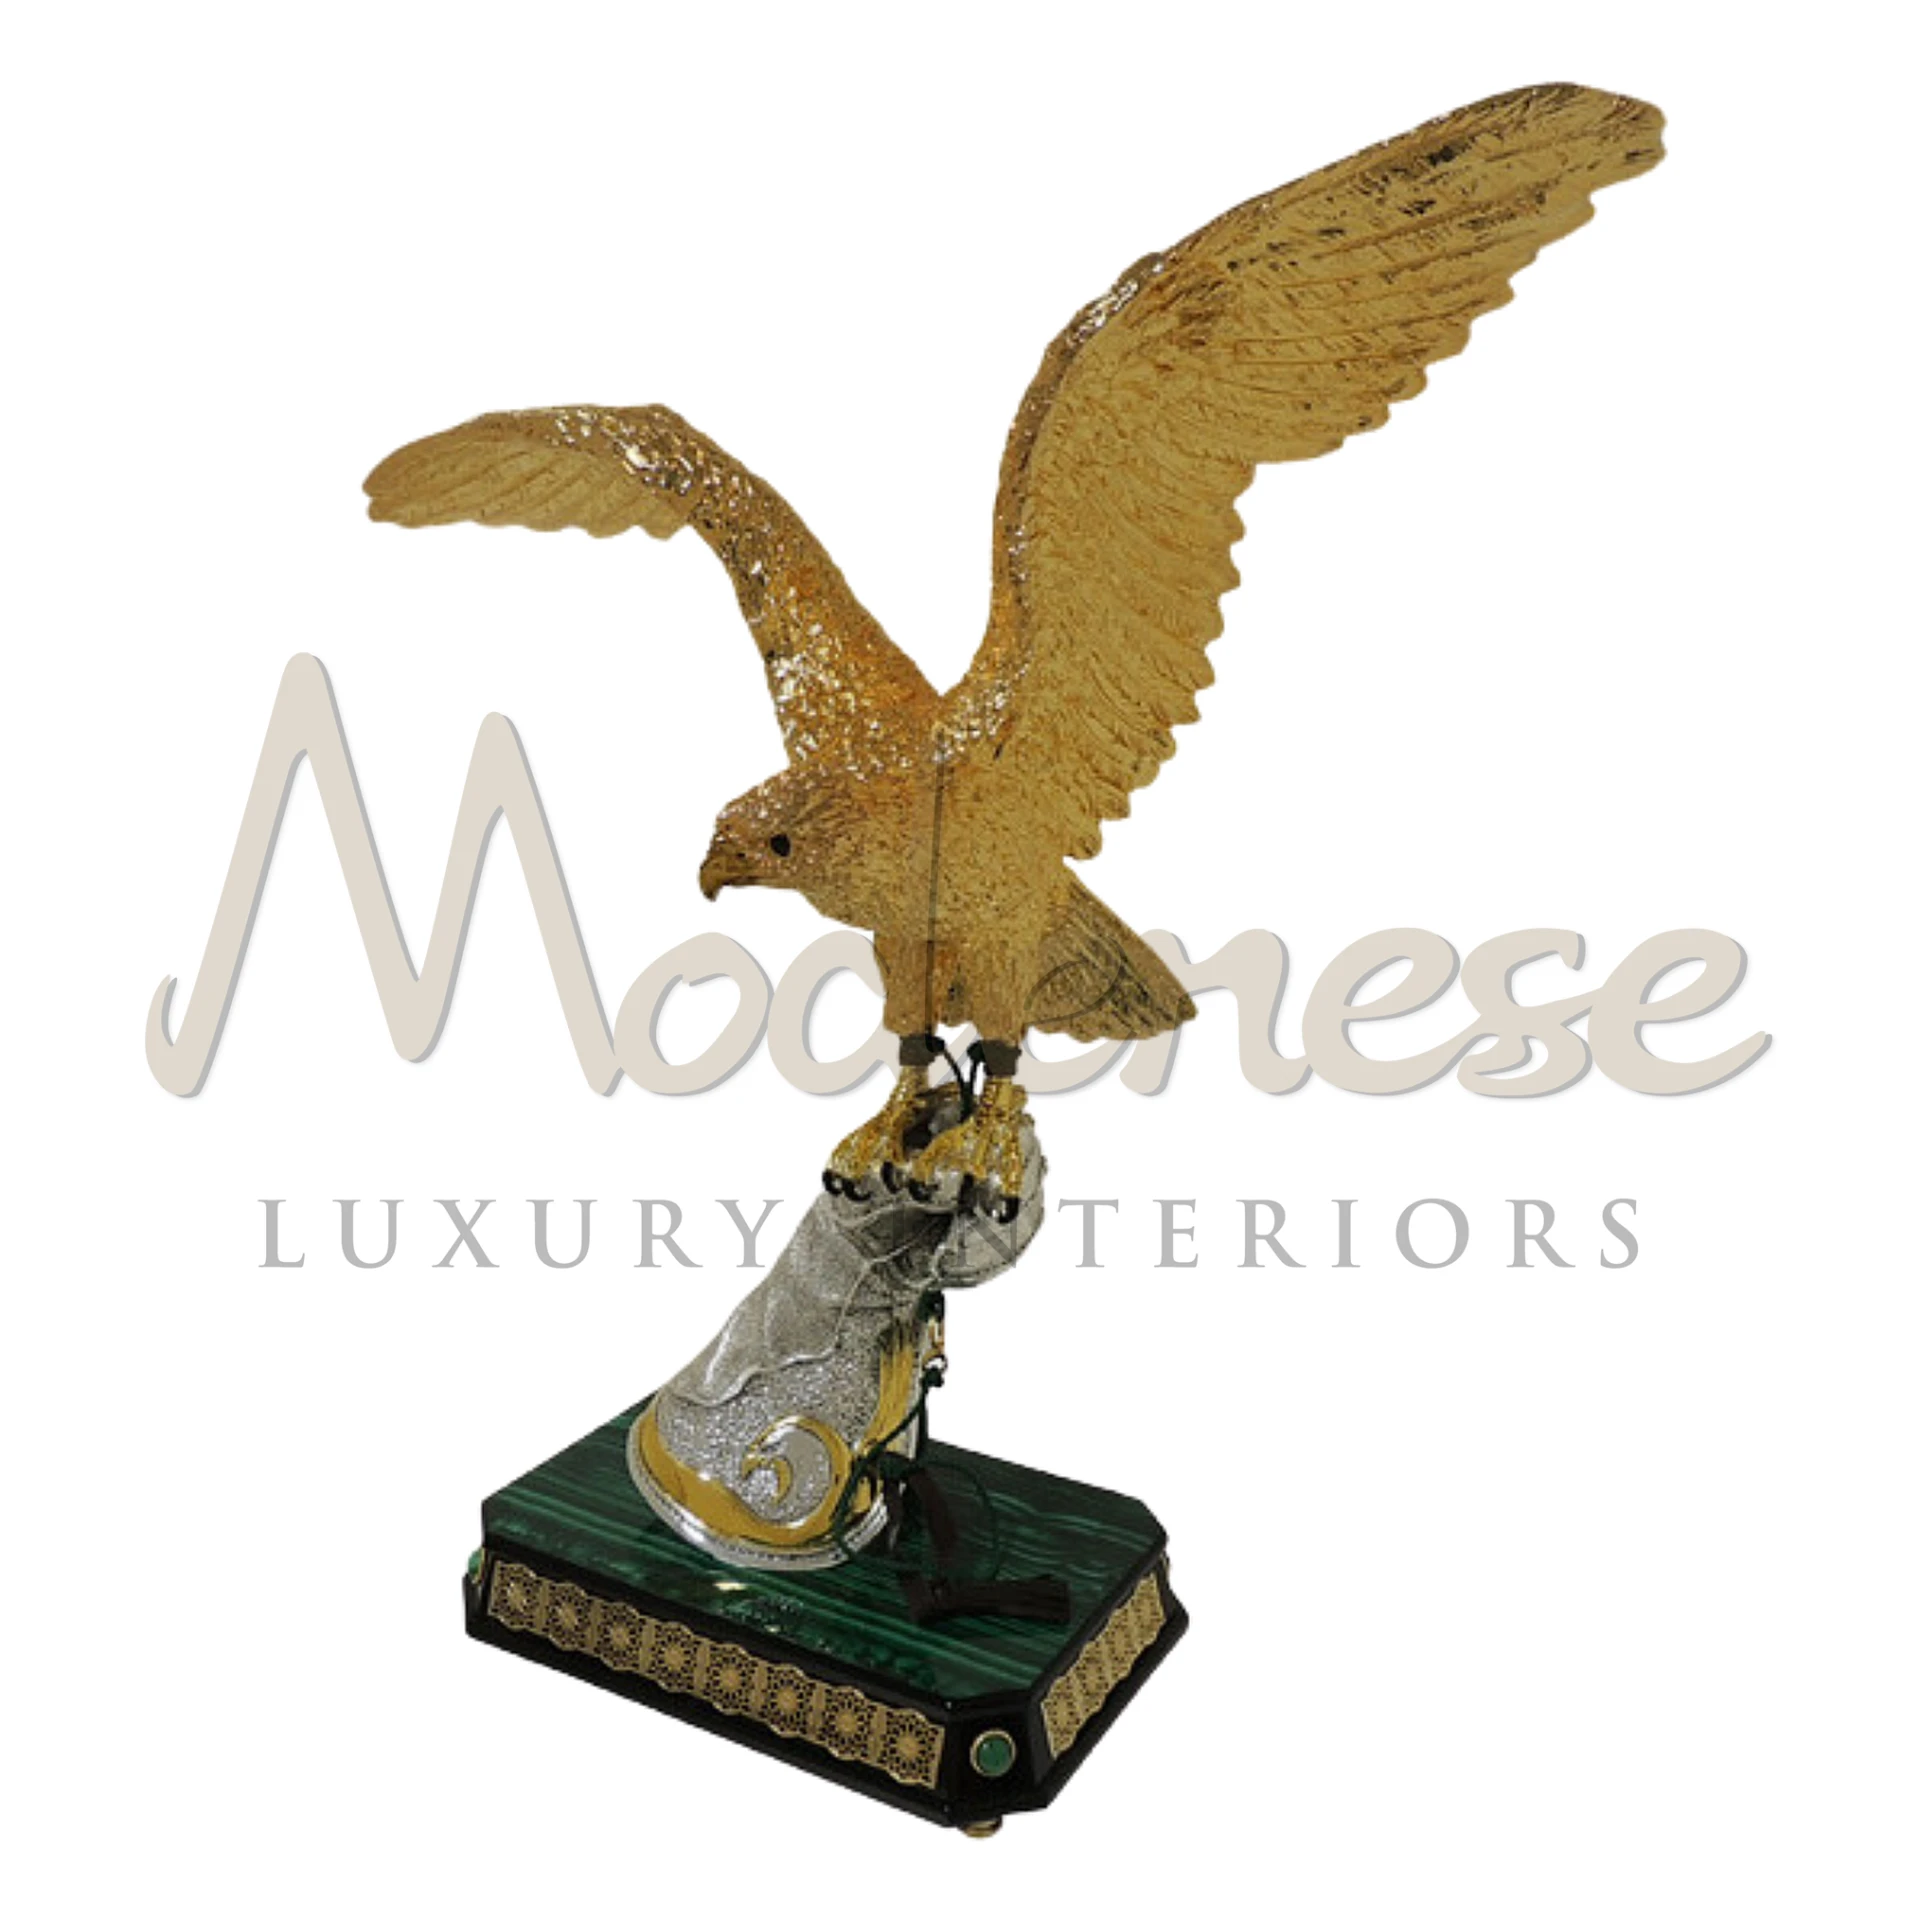 Gorgeous Gold Falcon ornament, featuring sleek modern design and intricate details, ideal for adding luxury and elegance to interior décor.






